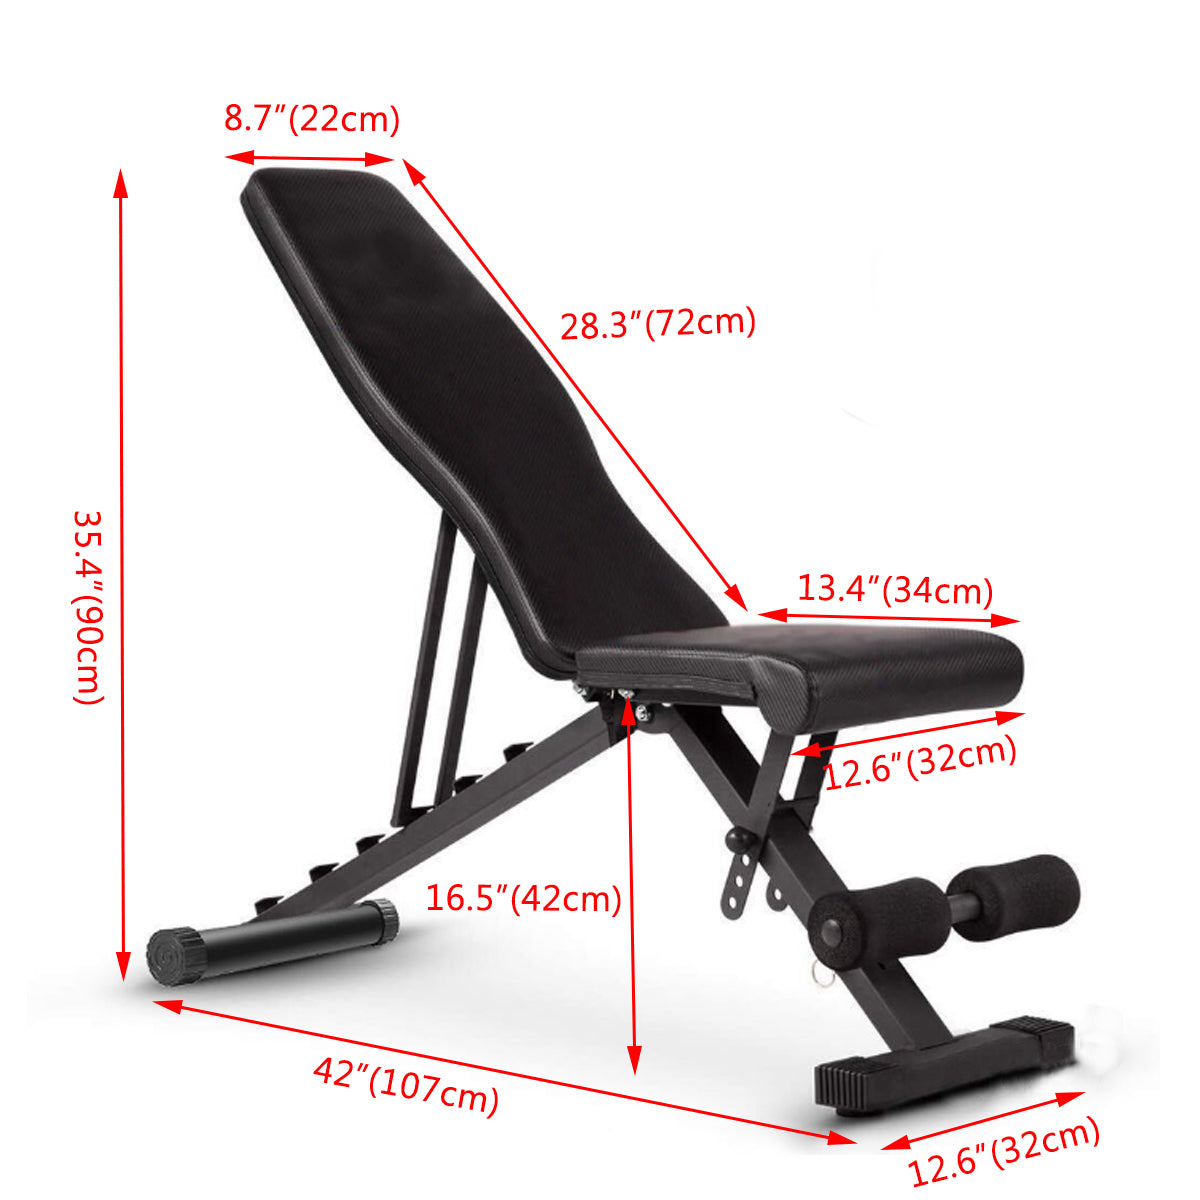 Multifunctional Muscle Bench Folding Abdominal Workout Bench Adjustable Weight Bench Gym Home Sport Fitness Equipment